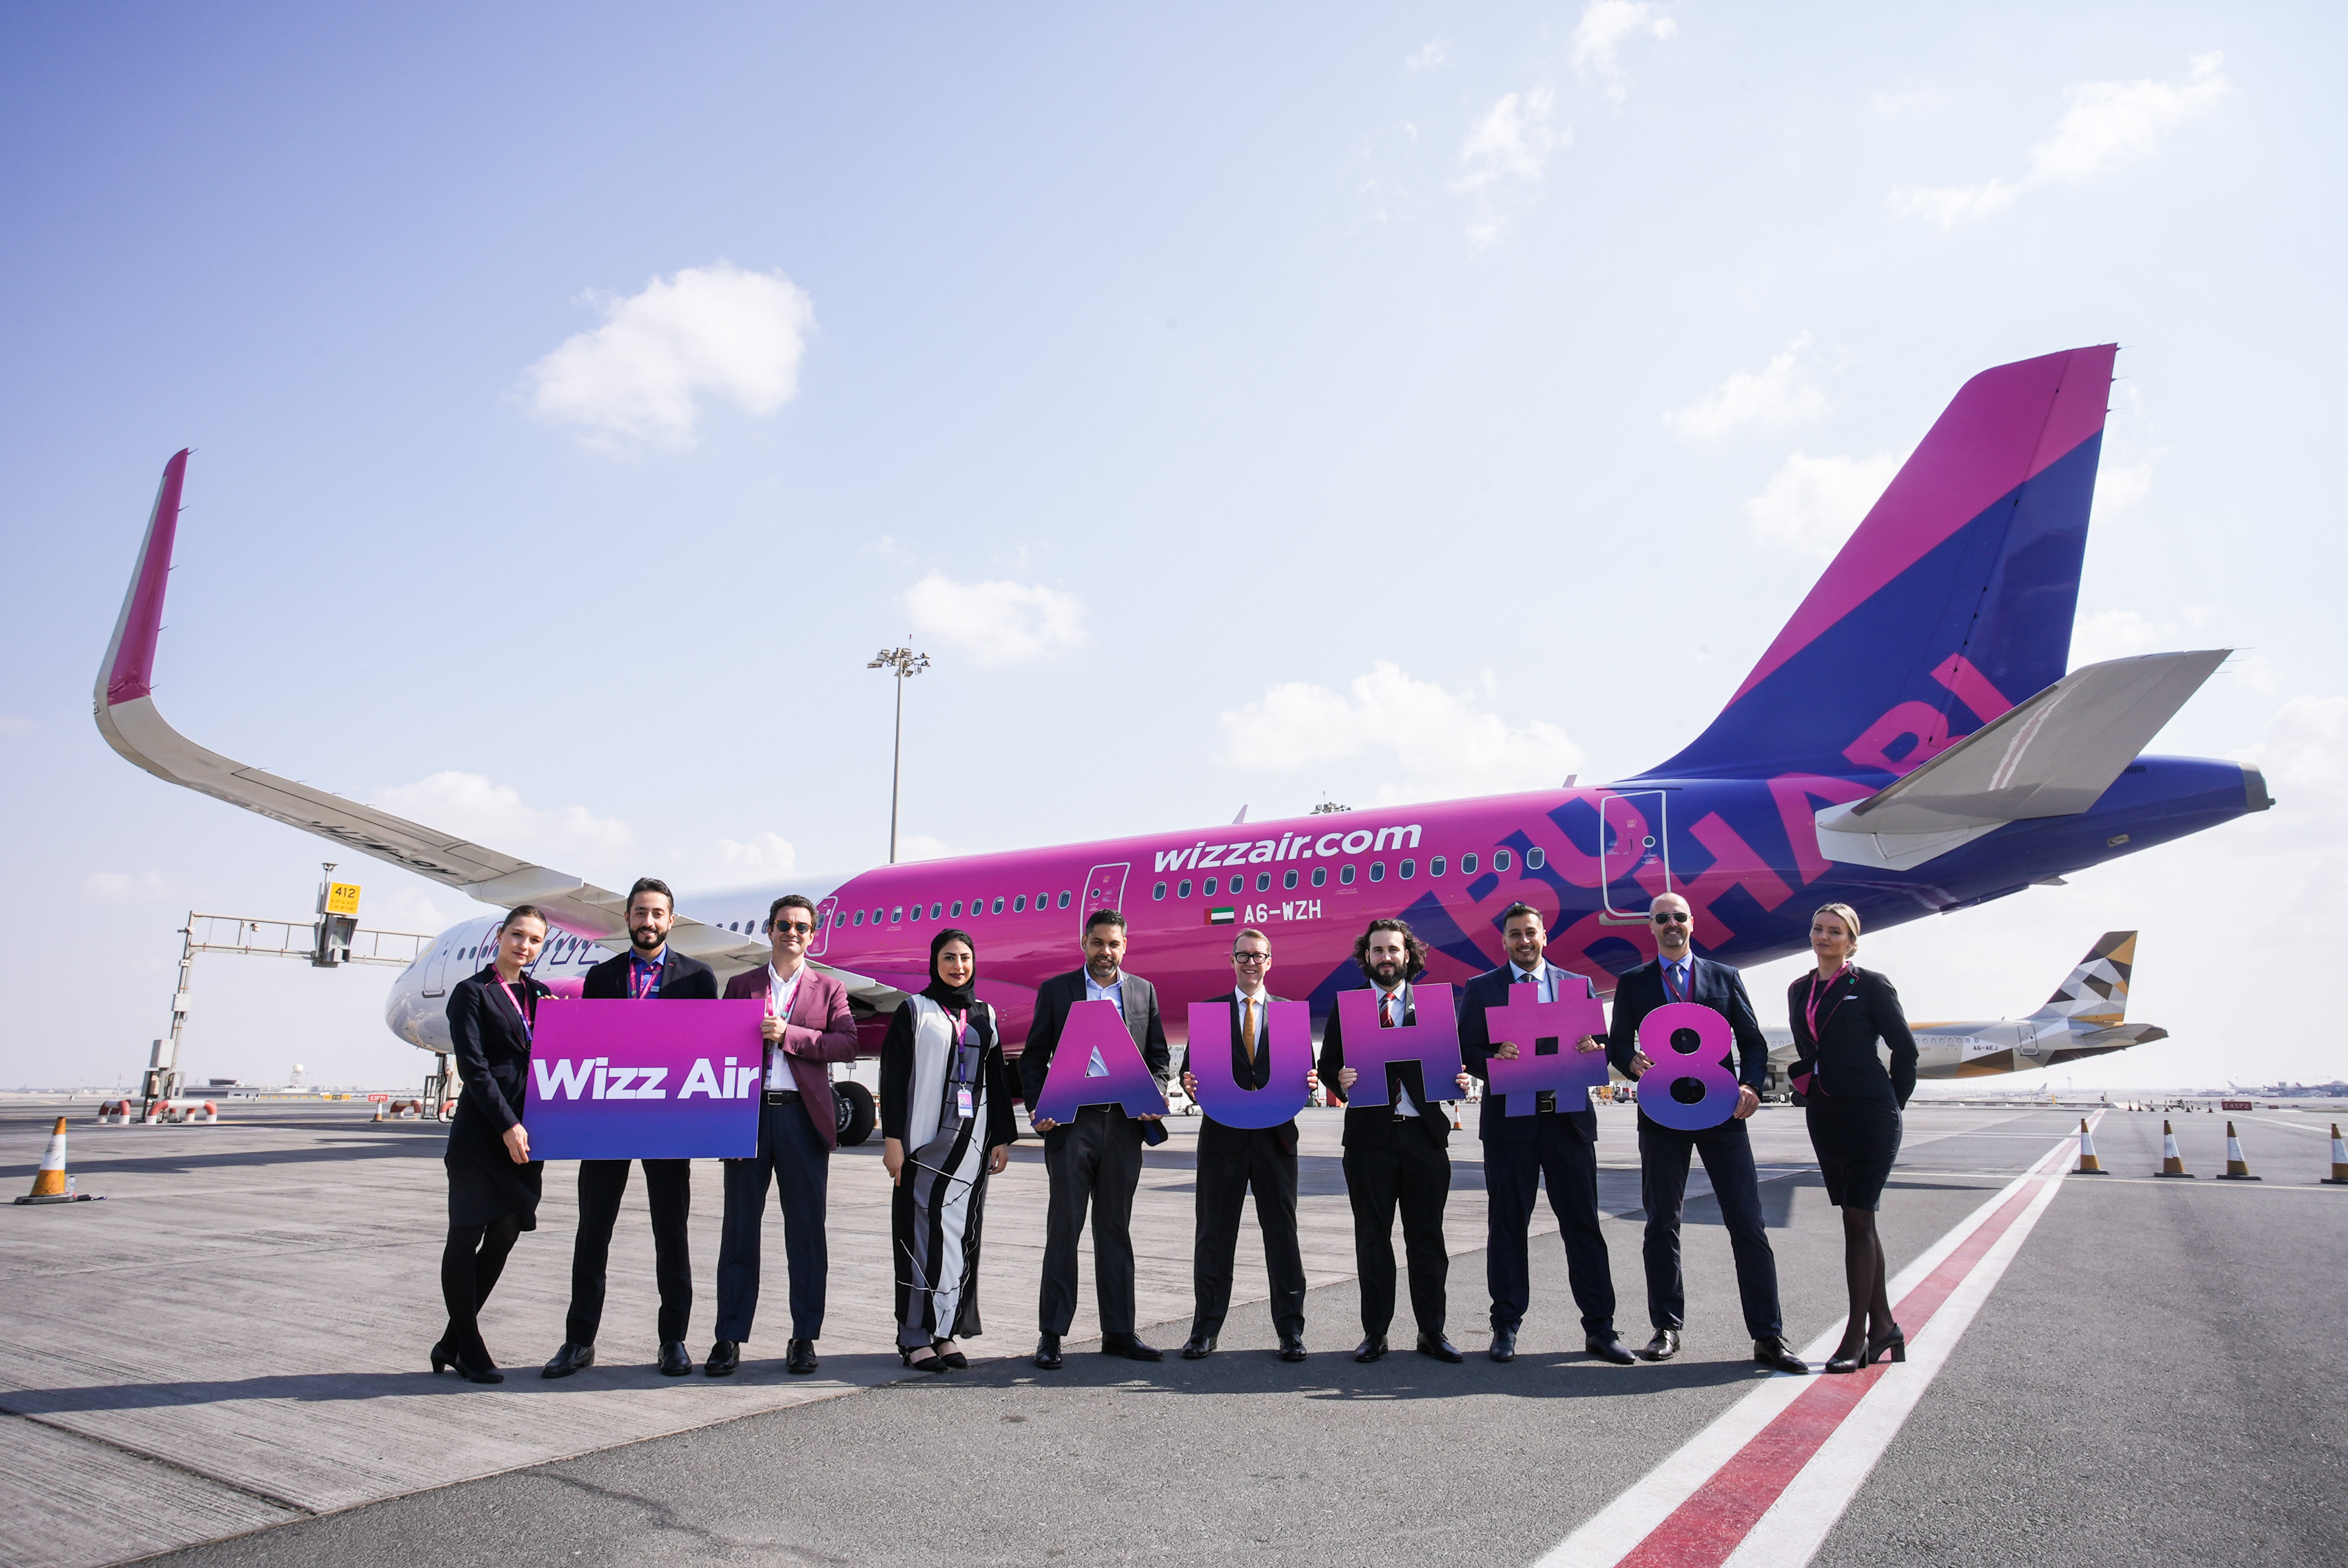 Wizz Air Abu Dhabi Celebrates Doubling Its Fleet With The Arrival Of Itseighth Aircraft